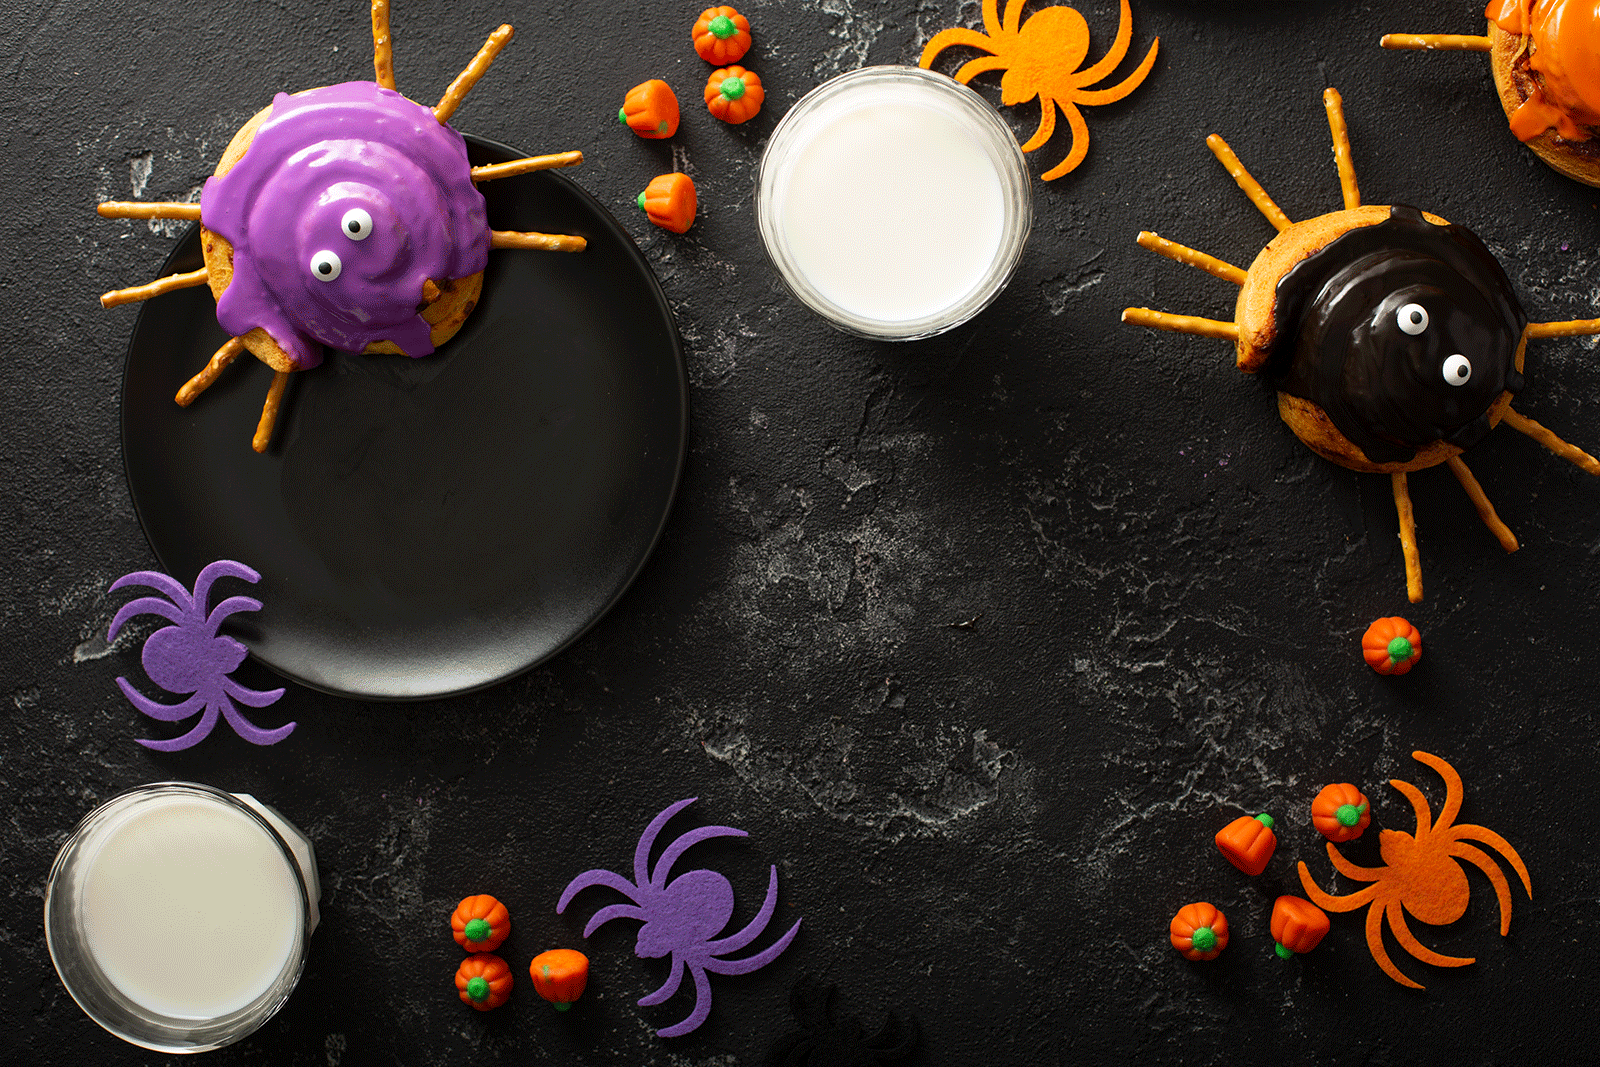 A Halloween Breakfast Table with Spider Cinnamon Rolls and Candy Pumpkins